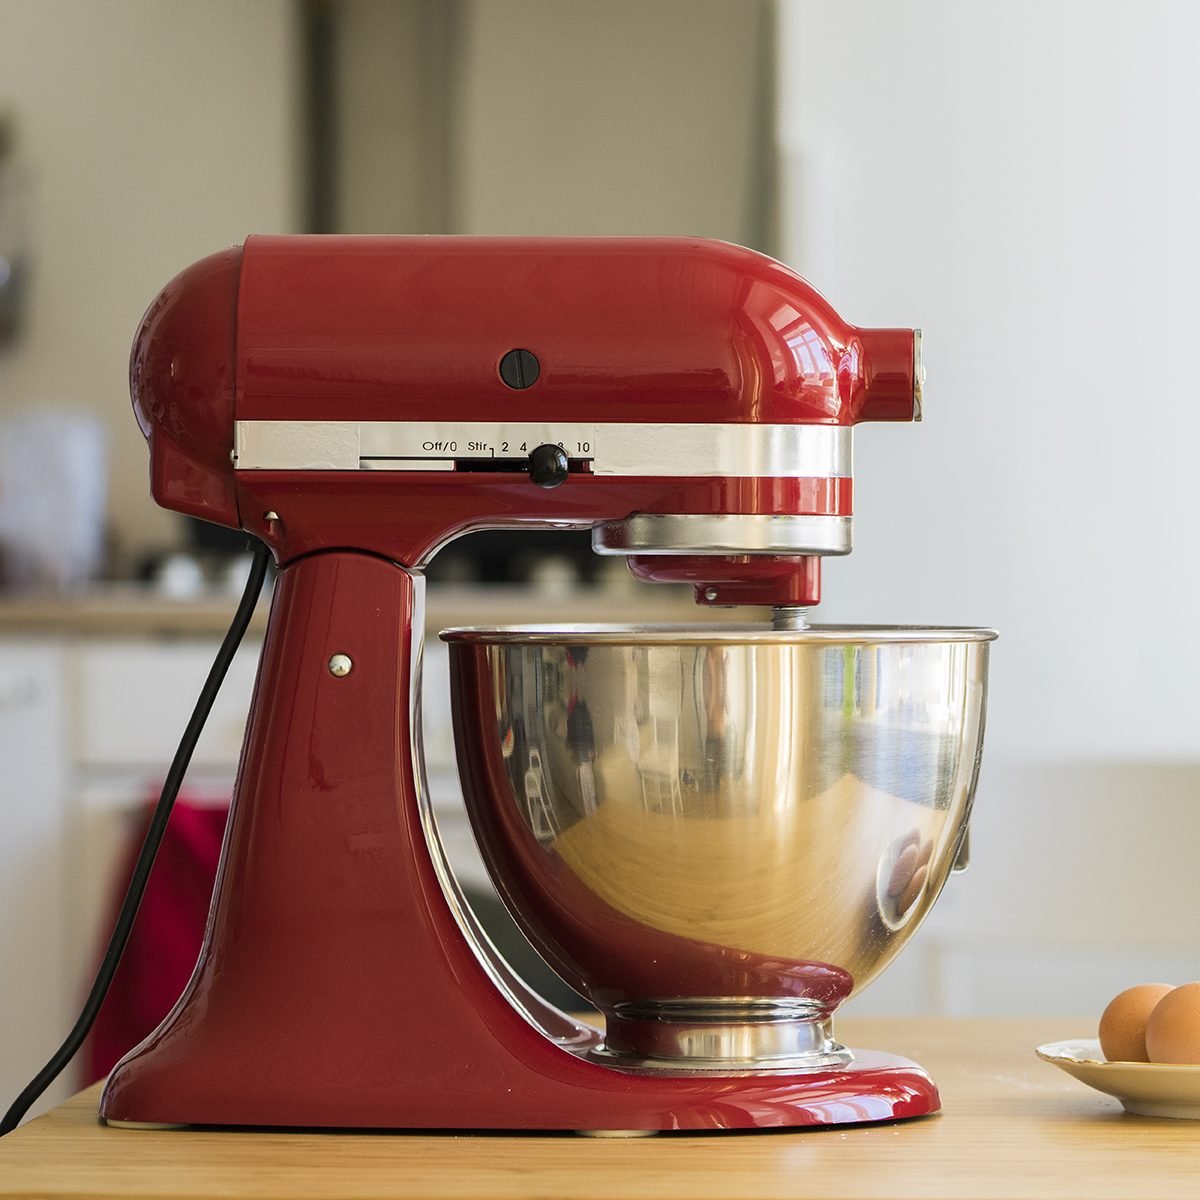 What to look for in a kitchen mixer